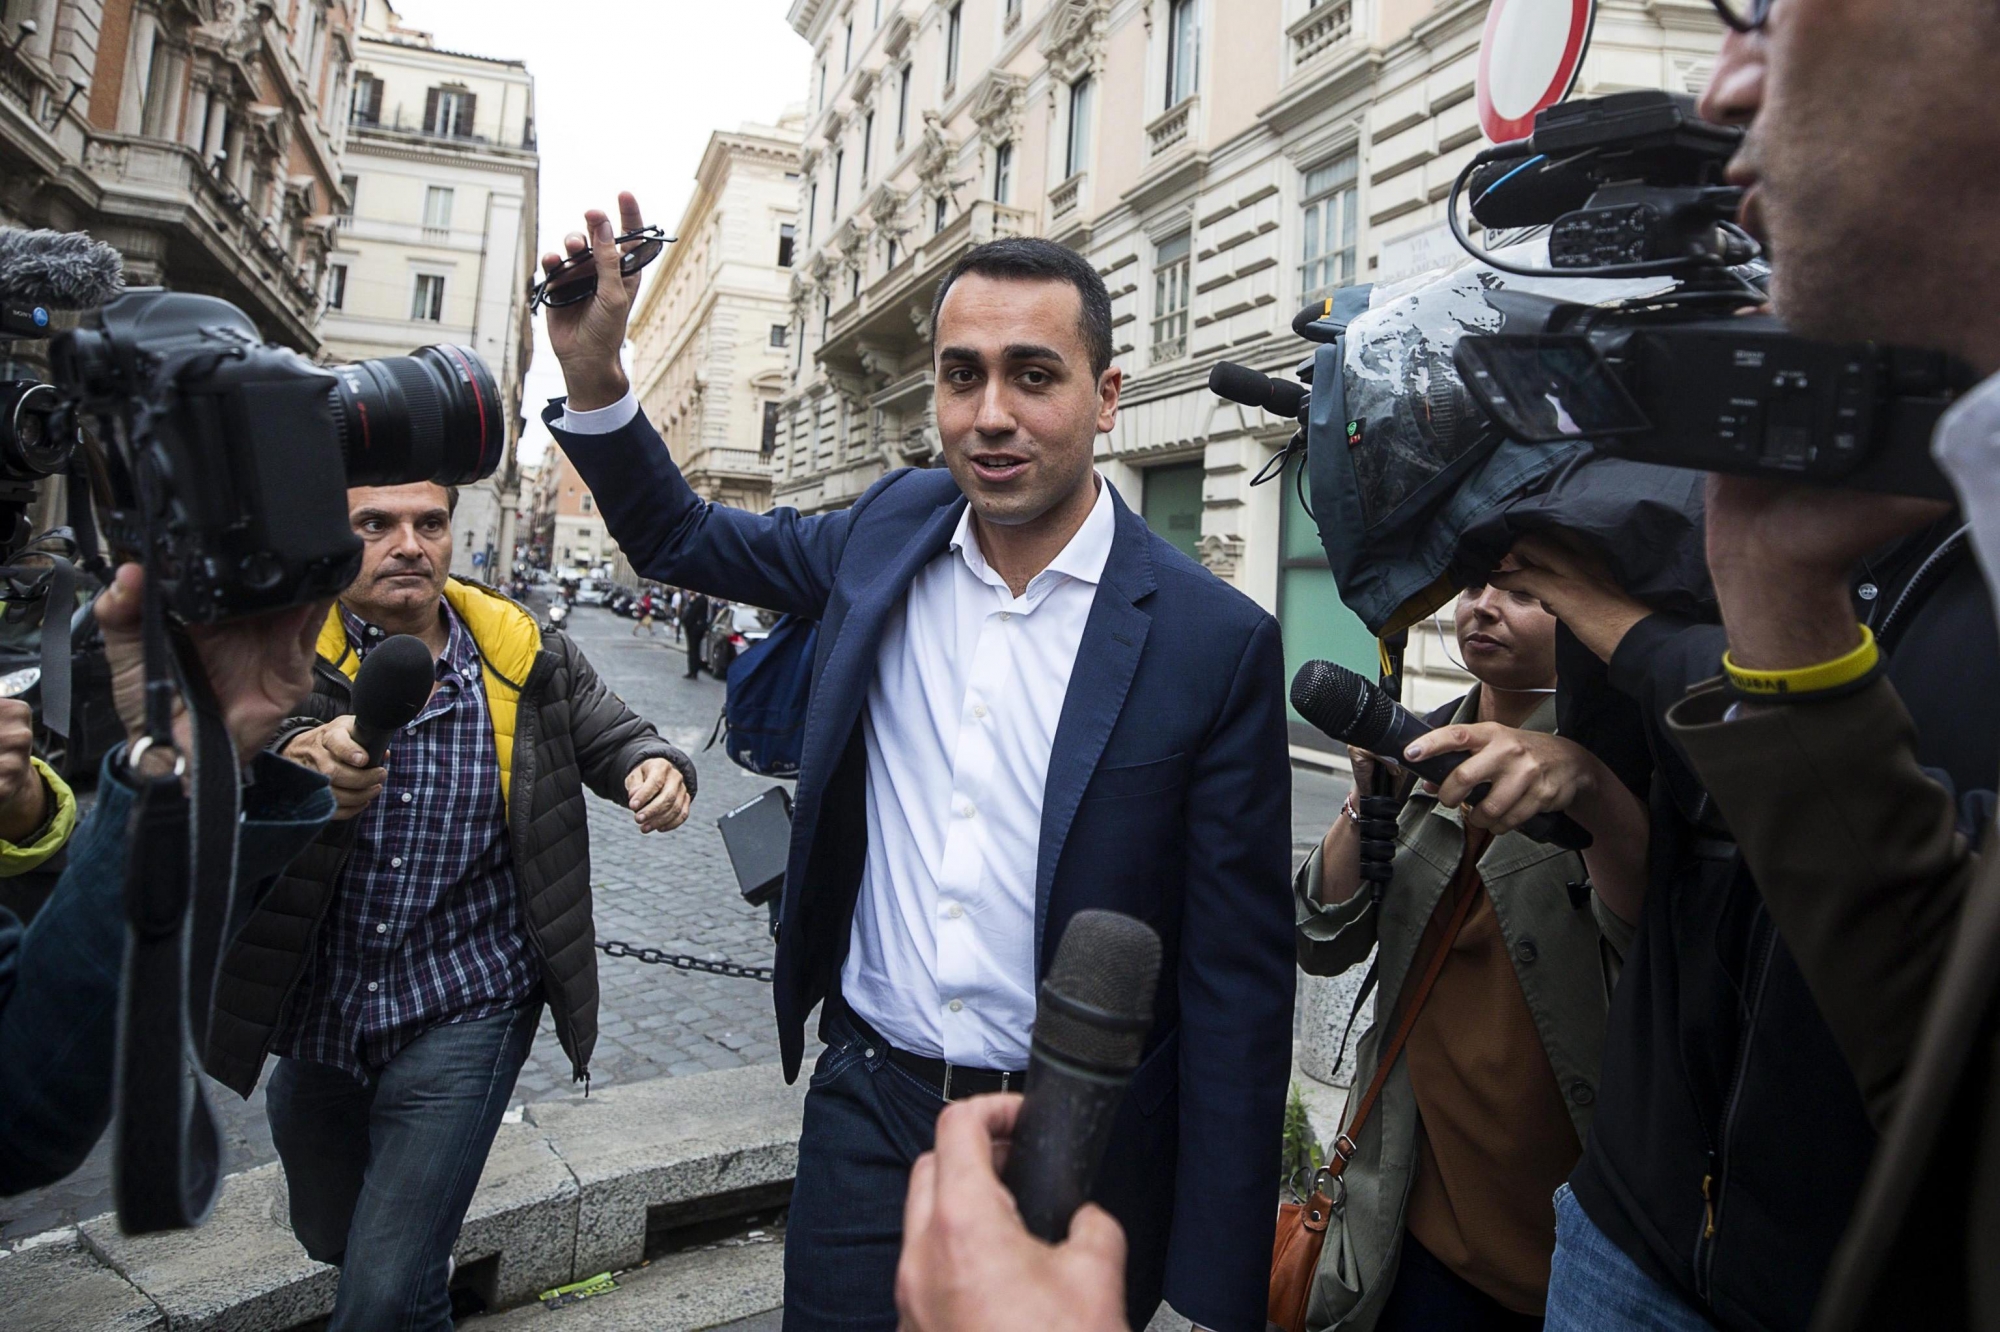 epa06755886 Five-Star Movement (M5S) leader Luigi Di Maio (C) talks to the media, as he arrives at the Lower House in Rome, Italy, 22 May 2018. Italian President Sergio Mattarella is taking some time out for reflection after League chief Matteo Salvini and 5-Star Movement (M5S) leader Luigi Di Maio told him on 21 May that they wanted law professor Giuseppe Conte to be the premier of a League-M5S government.  EPA/ANGELO CARCONI ITALY PARTIES GOVERNMENT FORMATION